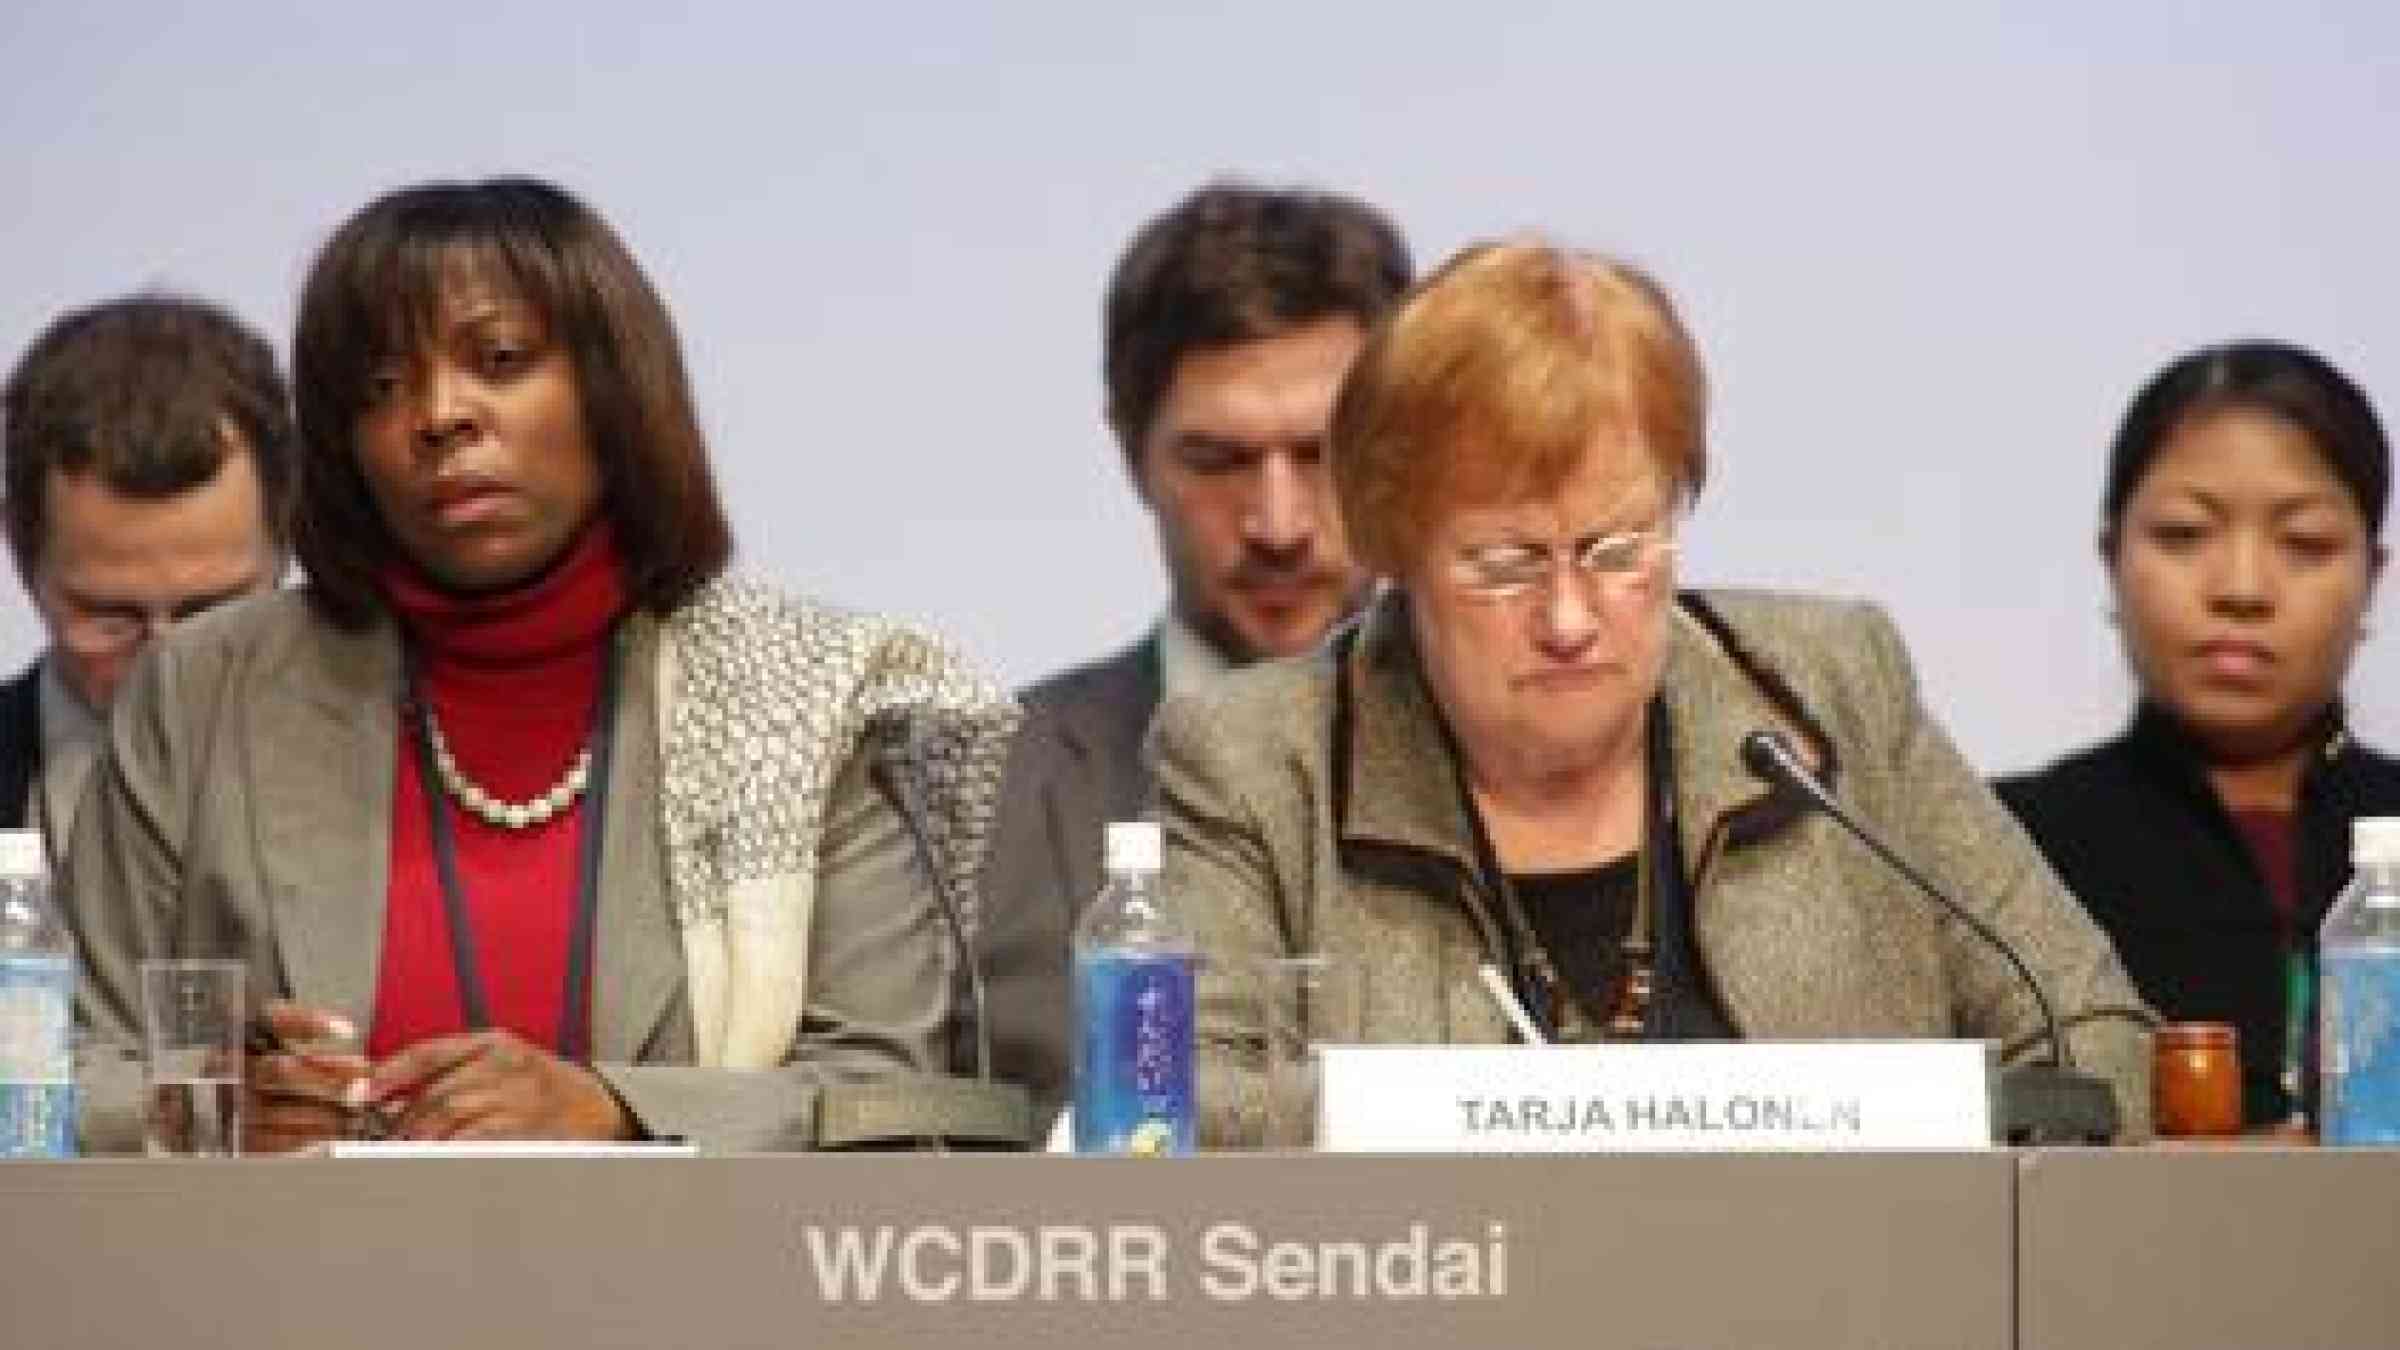 At today's High-Level Dialogue on Mobilizing Women Leaders for DRR, (left) Ertharin Cousin, Executive Director WFP, and the former President of Finland, Tarja Halonen. (Photo: UNISDR)